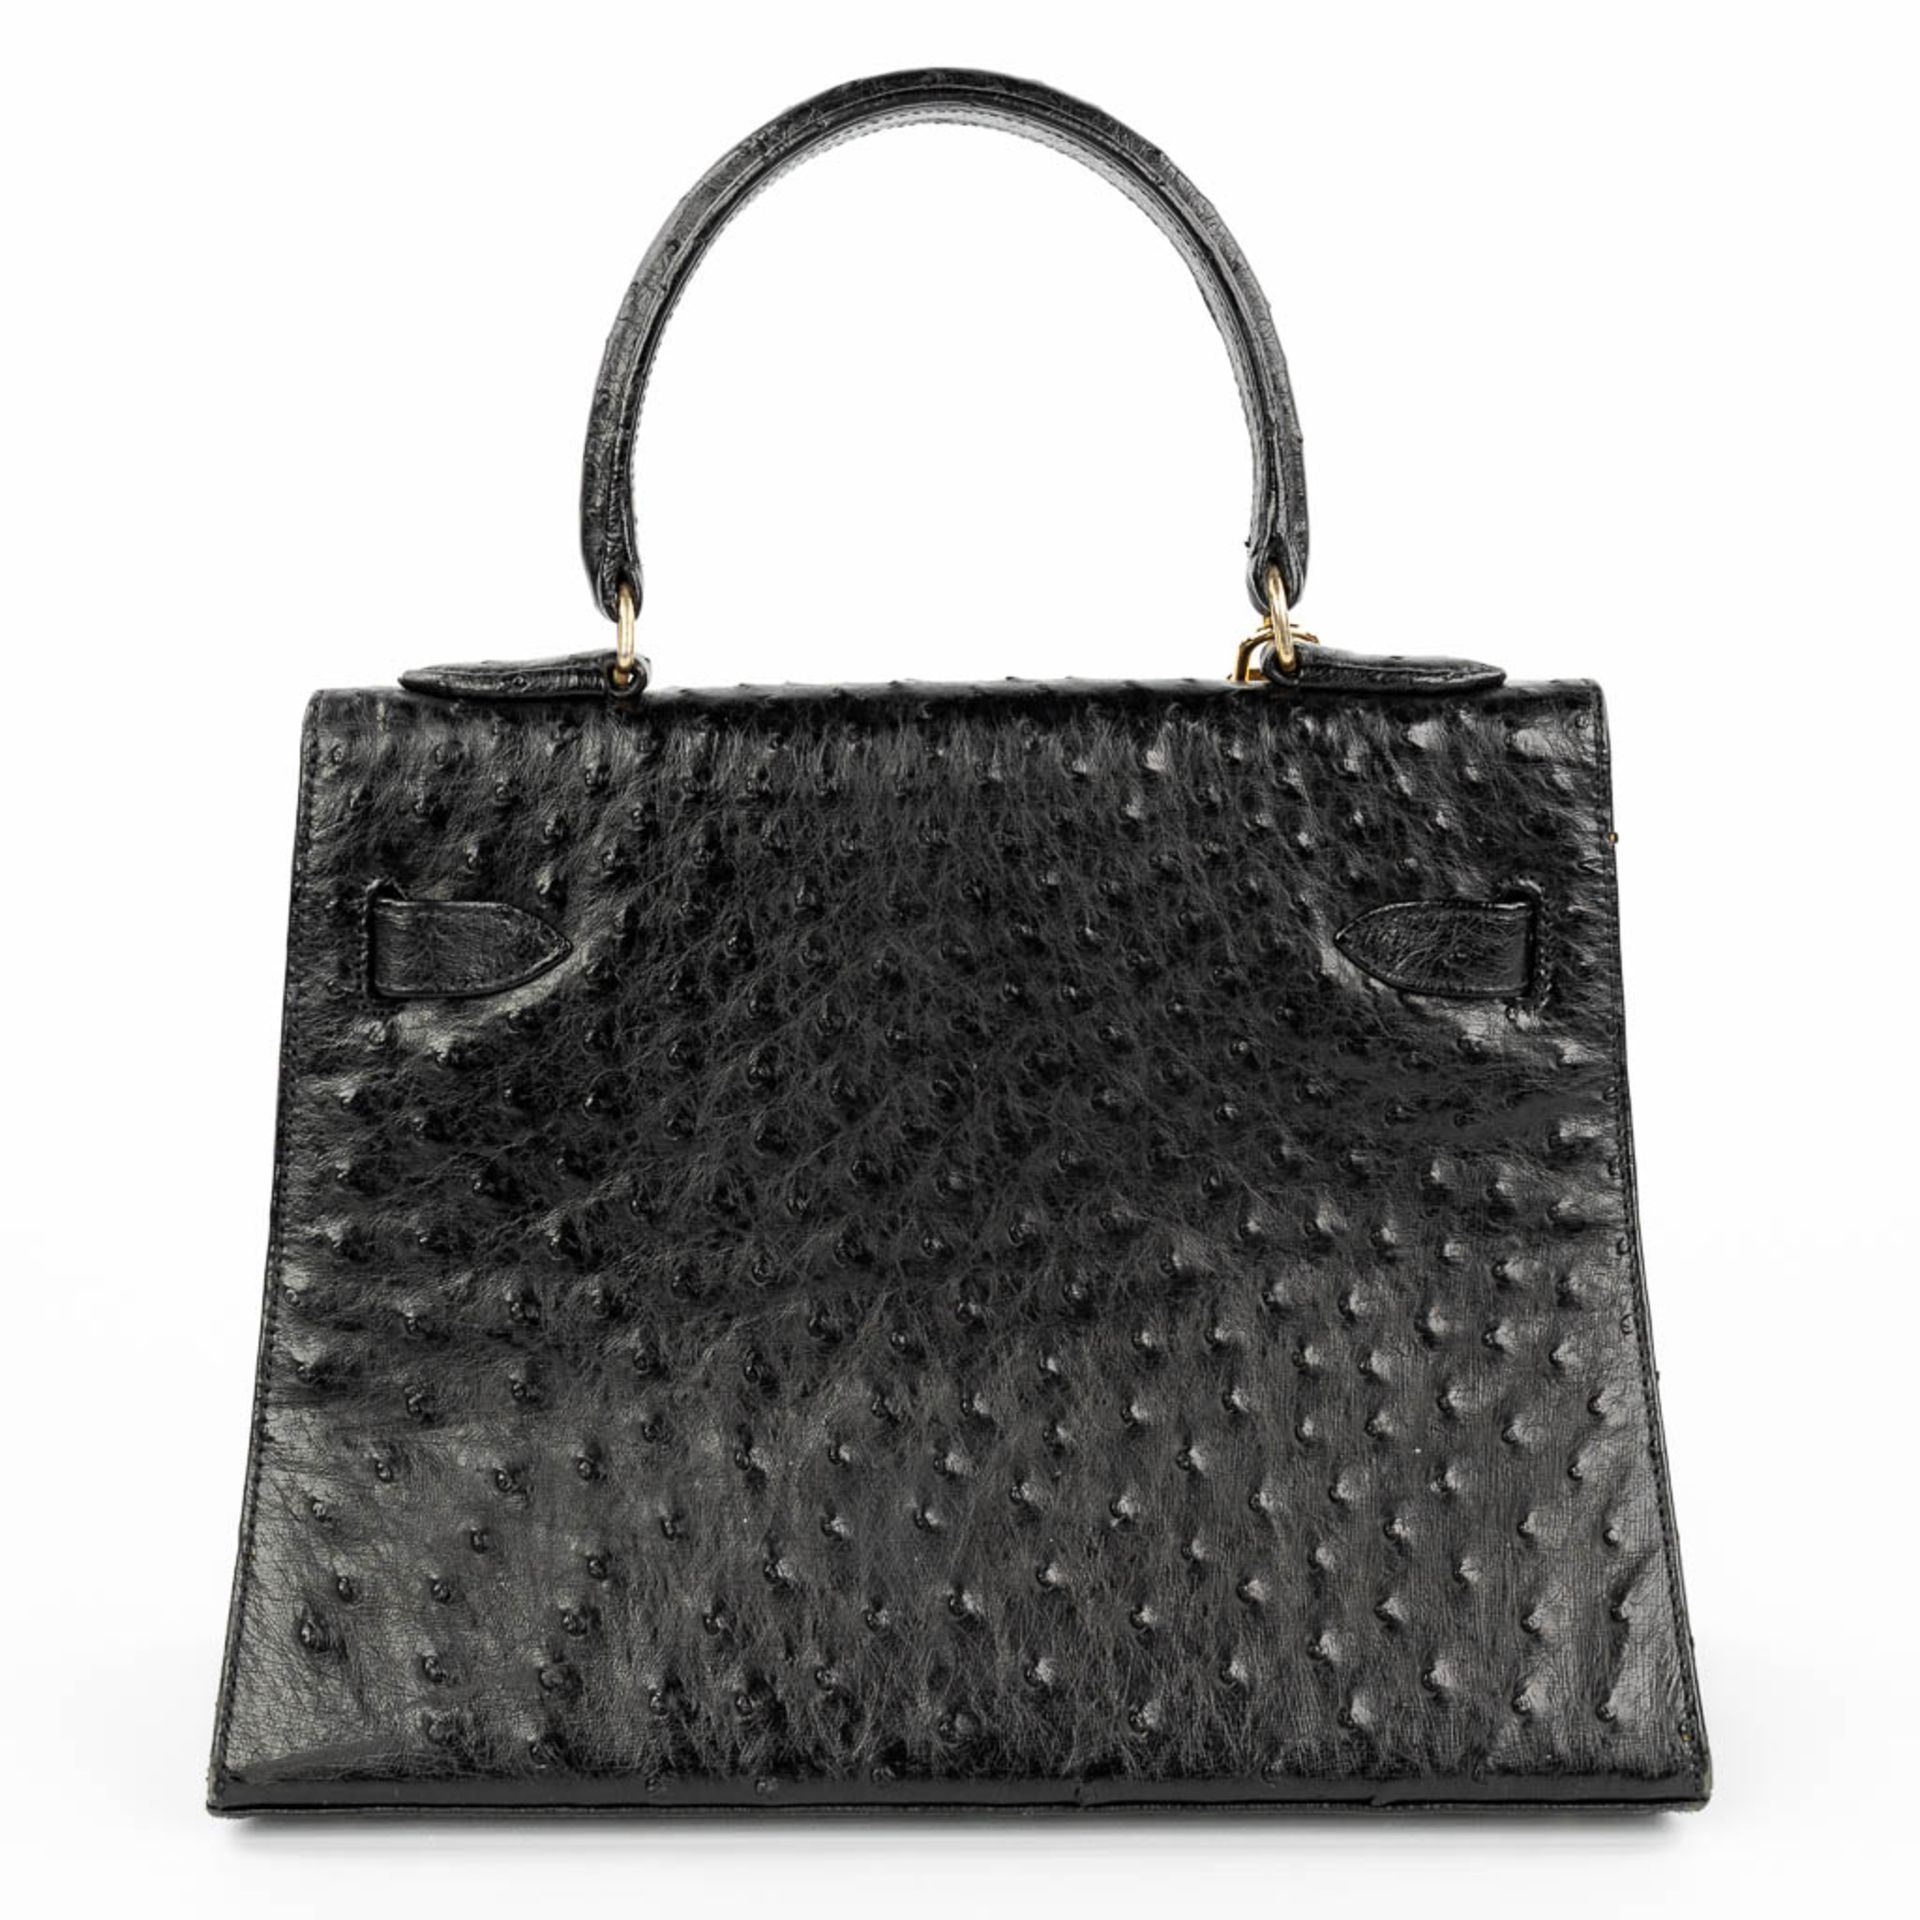 A handbag made of black ostrich leather and made by Olivier Gurtner in Switzerland. (H:28cm) - Image 17 of 17